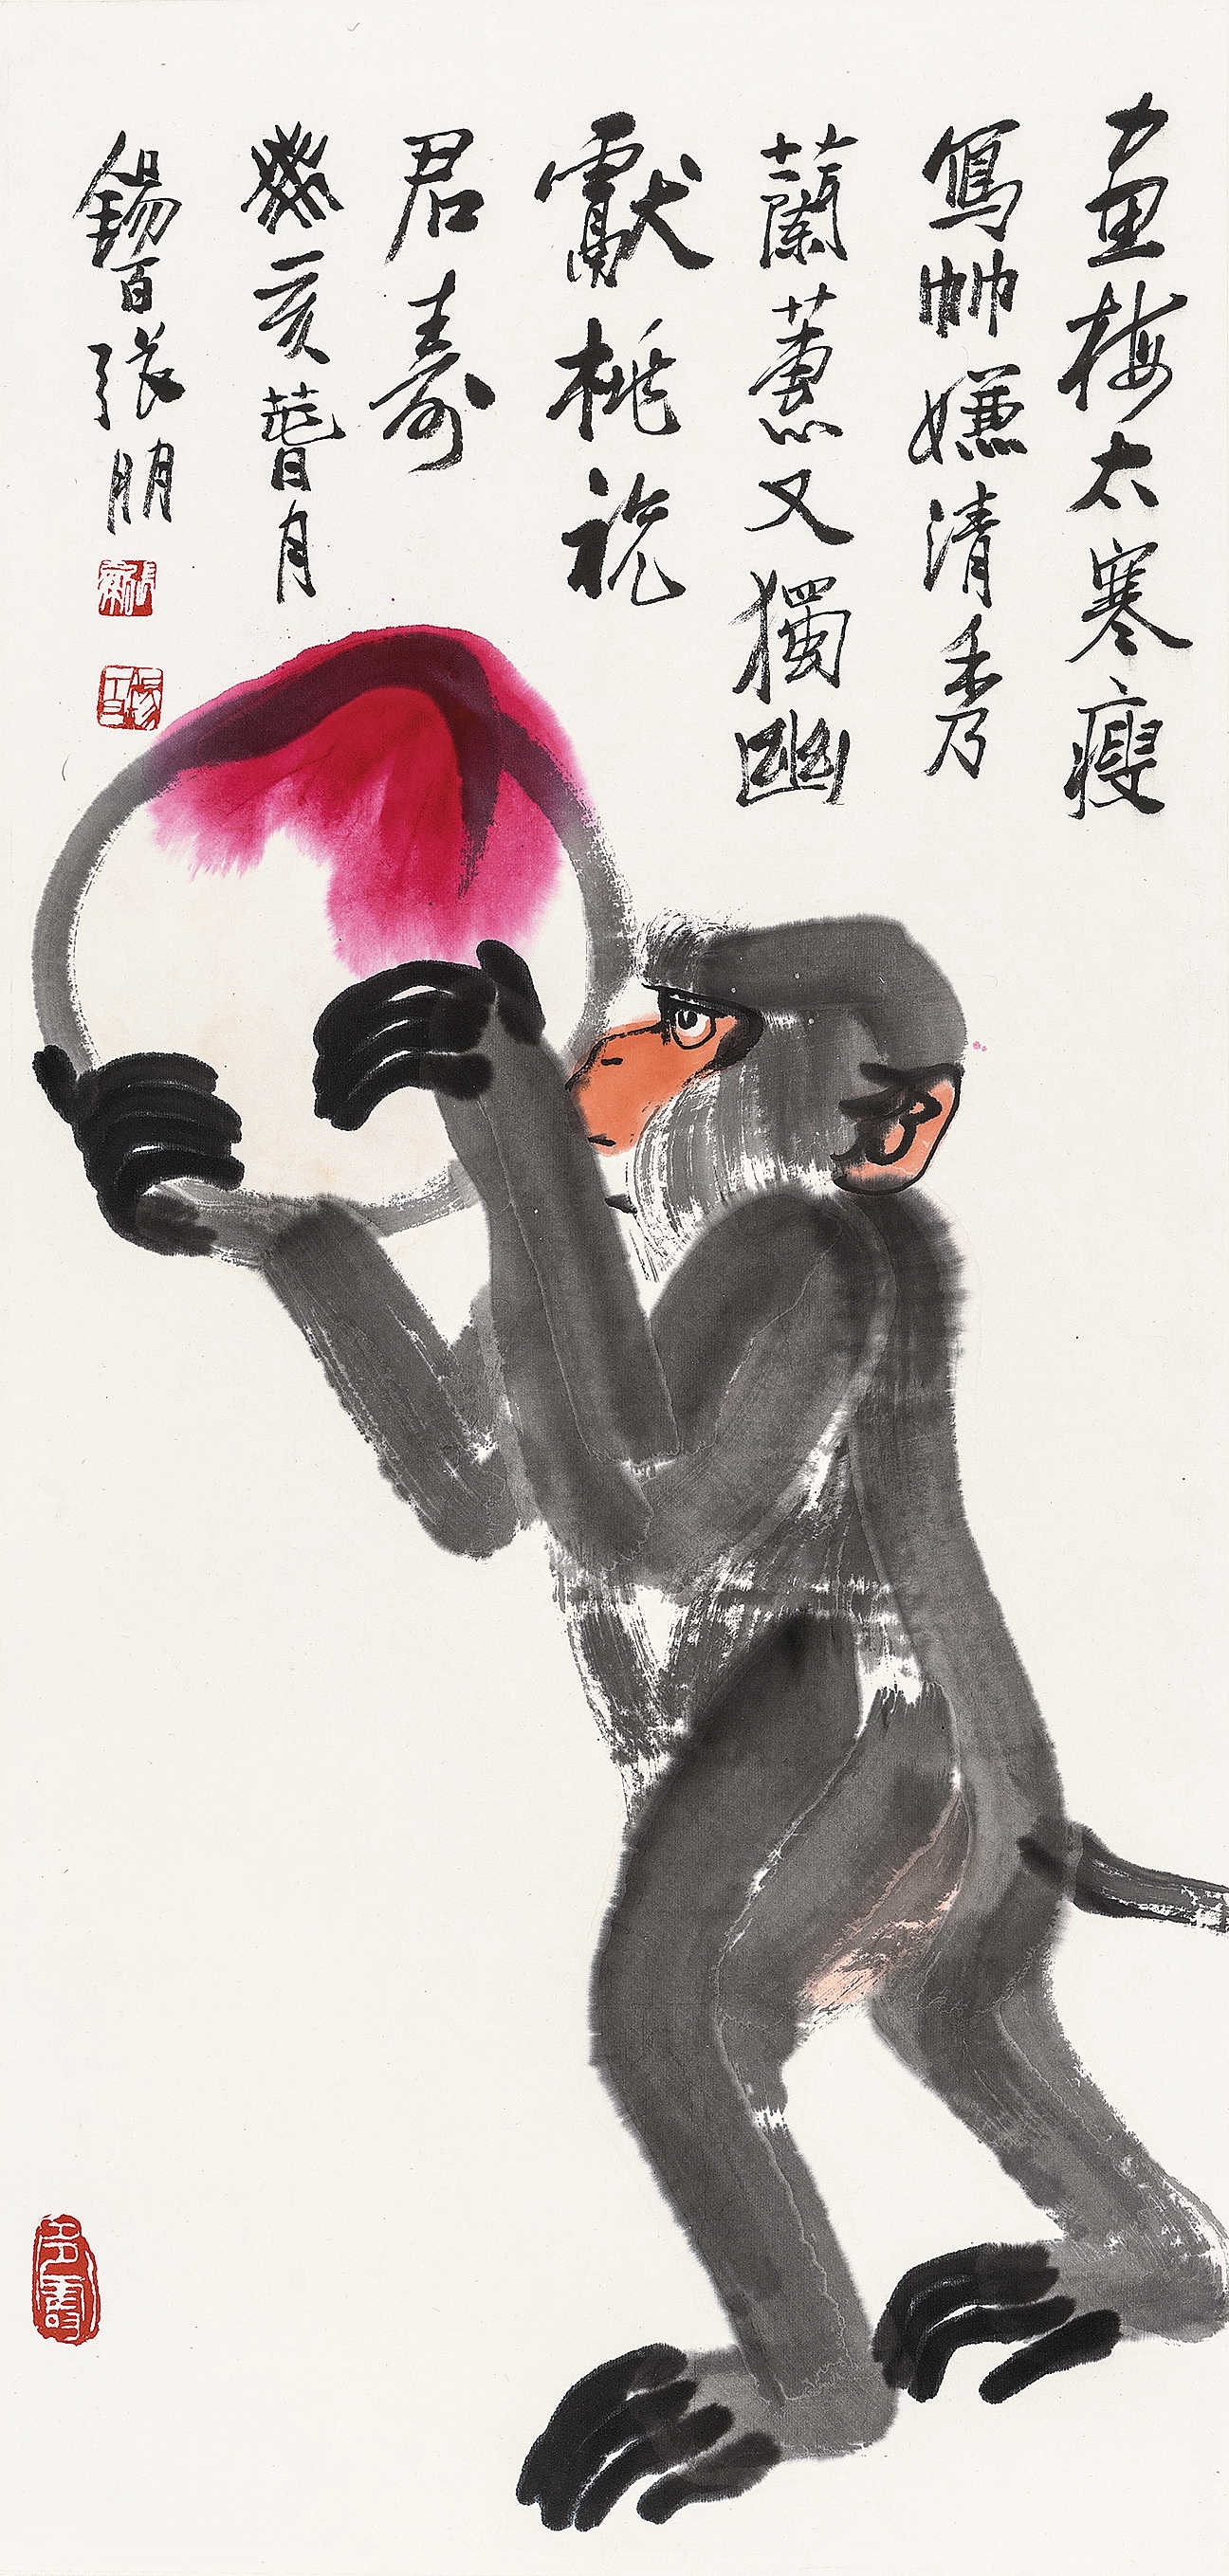 Monkey and Peach by Zhang Peng, 1983